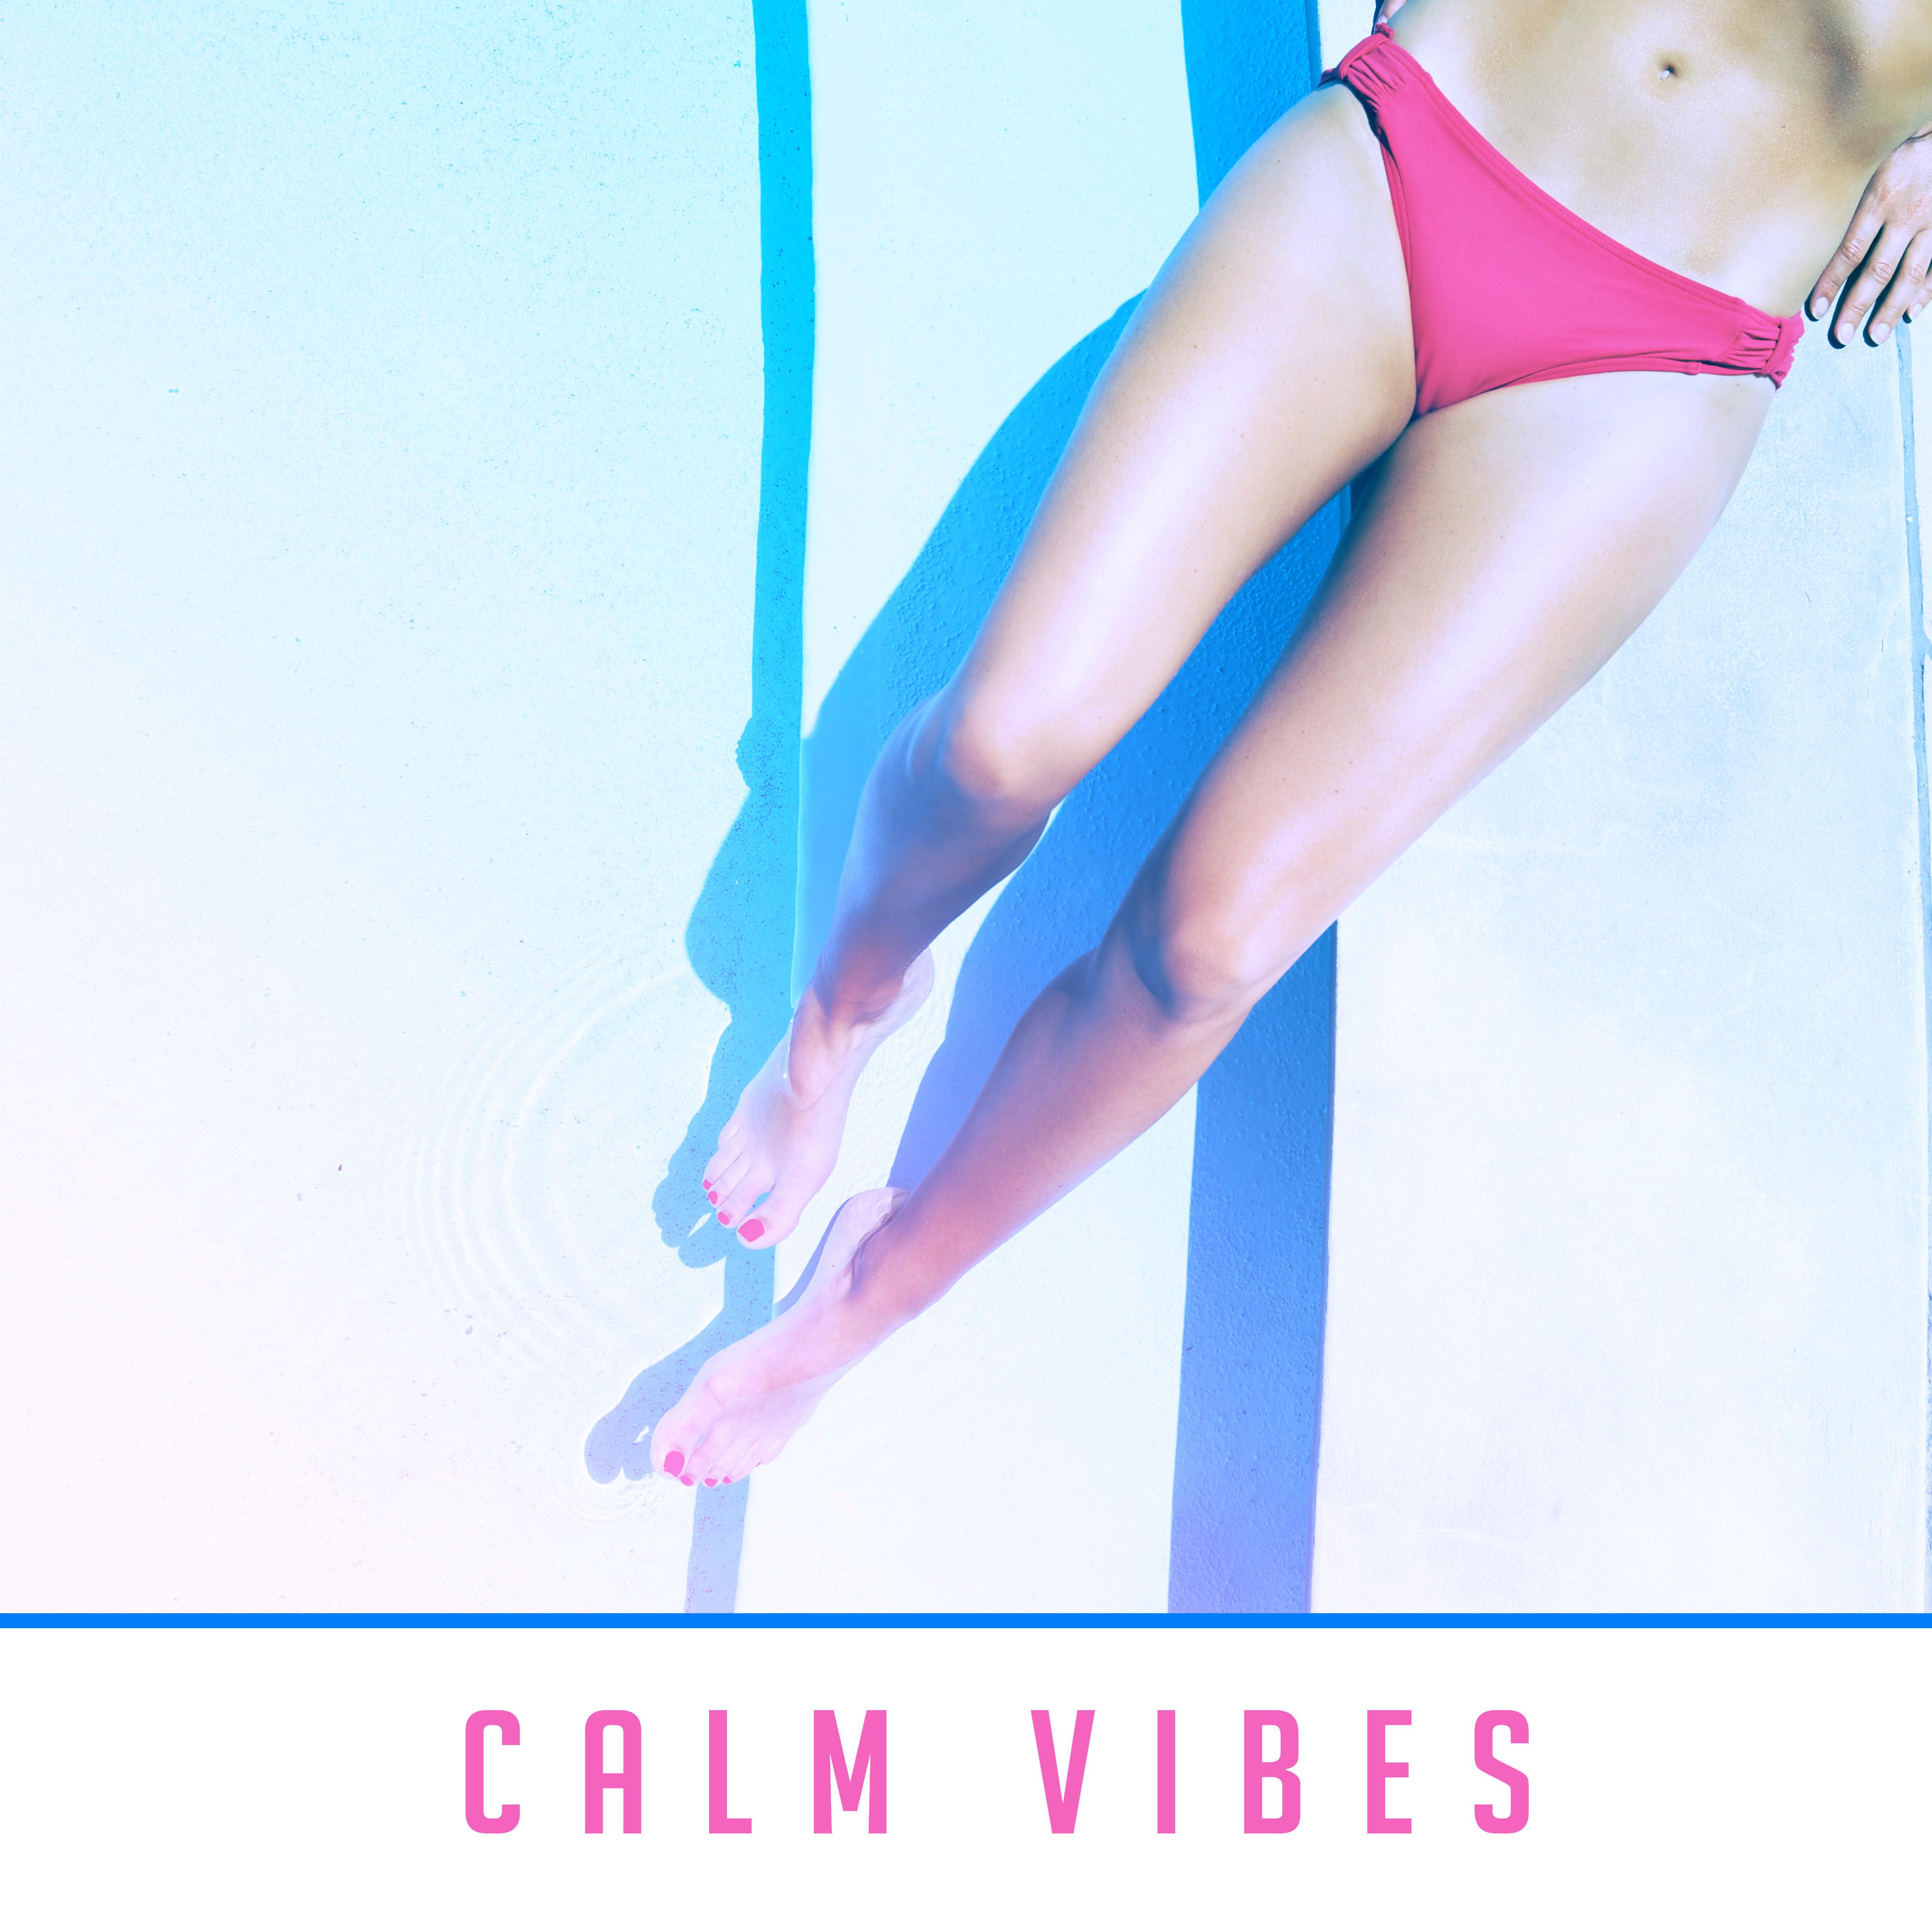 Calm Vibes – Soft Chill Out Music, Summer Beach Lounge, Rest on Tropical Island